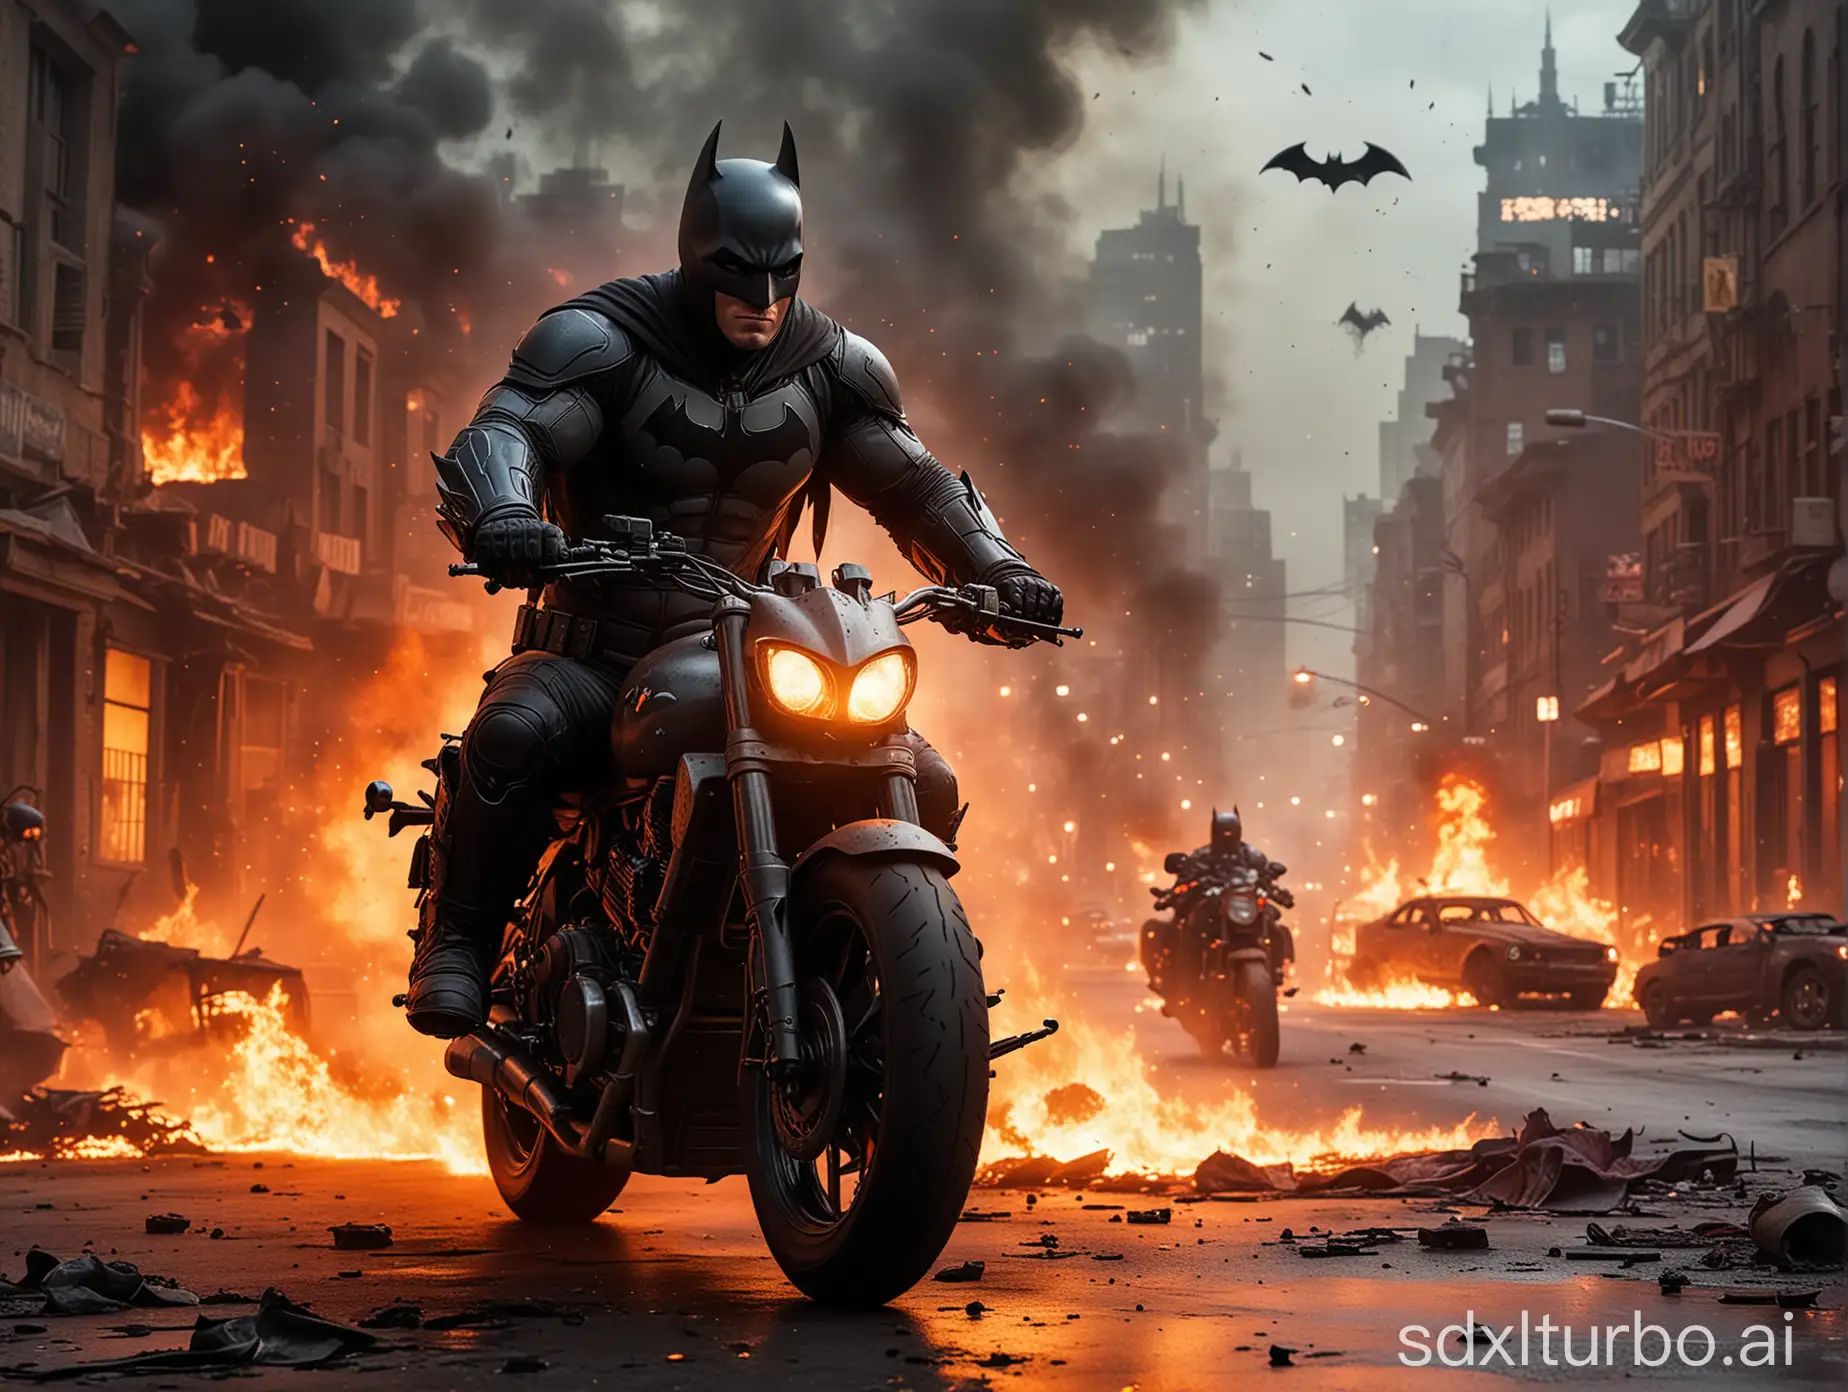 Motorcycles go, Batman sits on the motorcycle, the motorcycle is red and he drives through a burning city